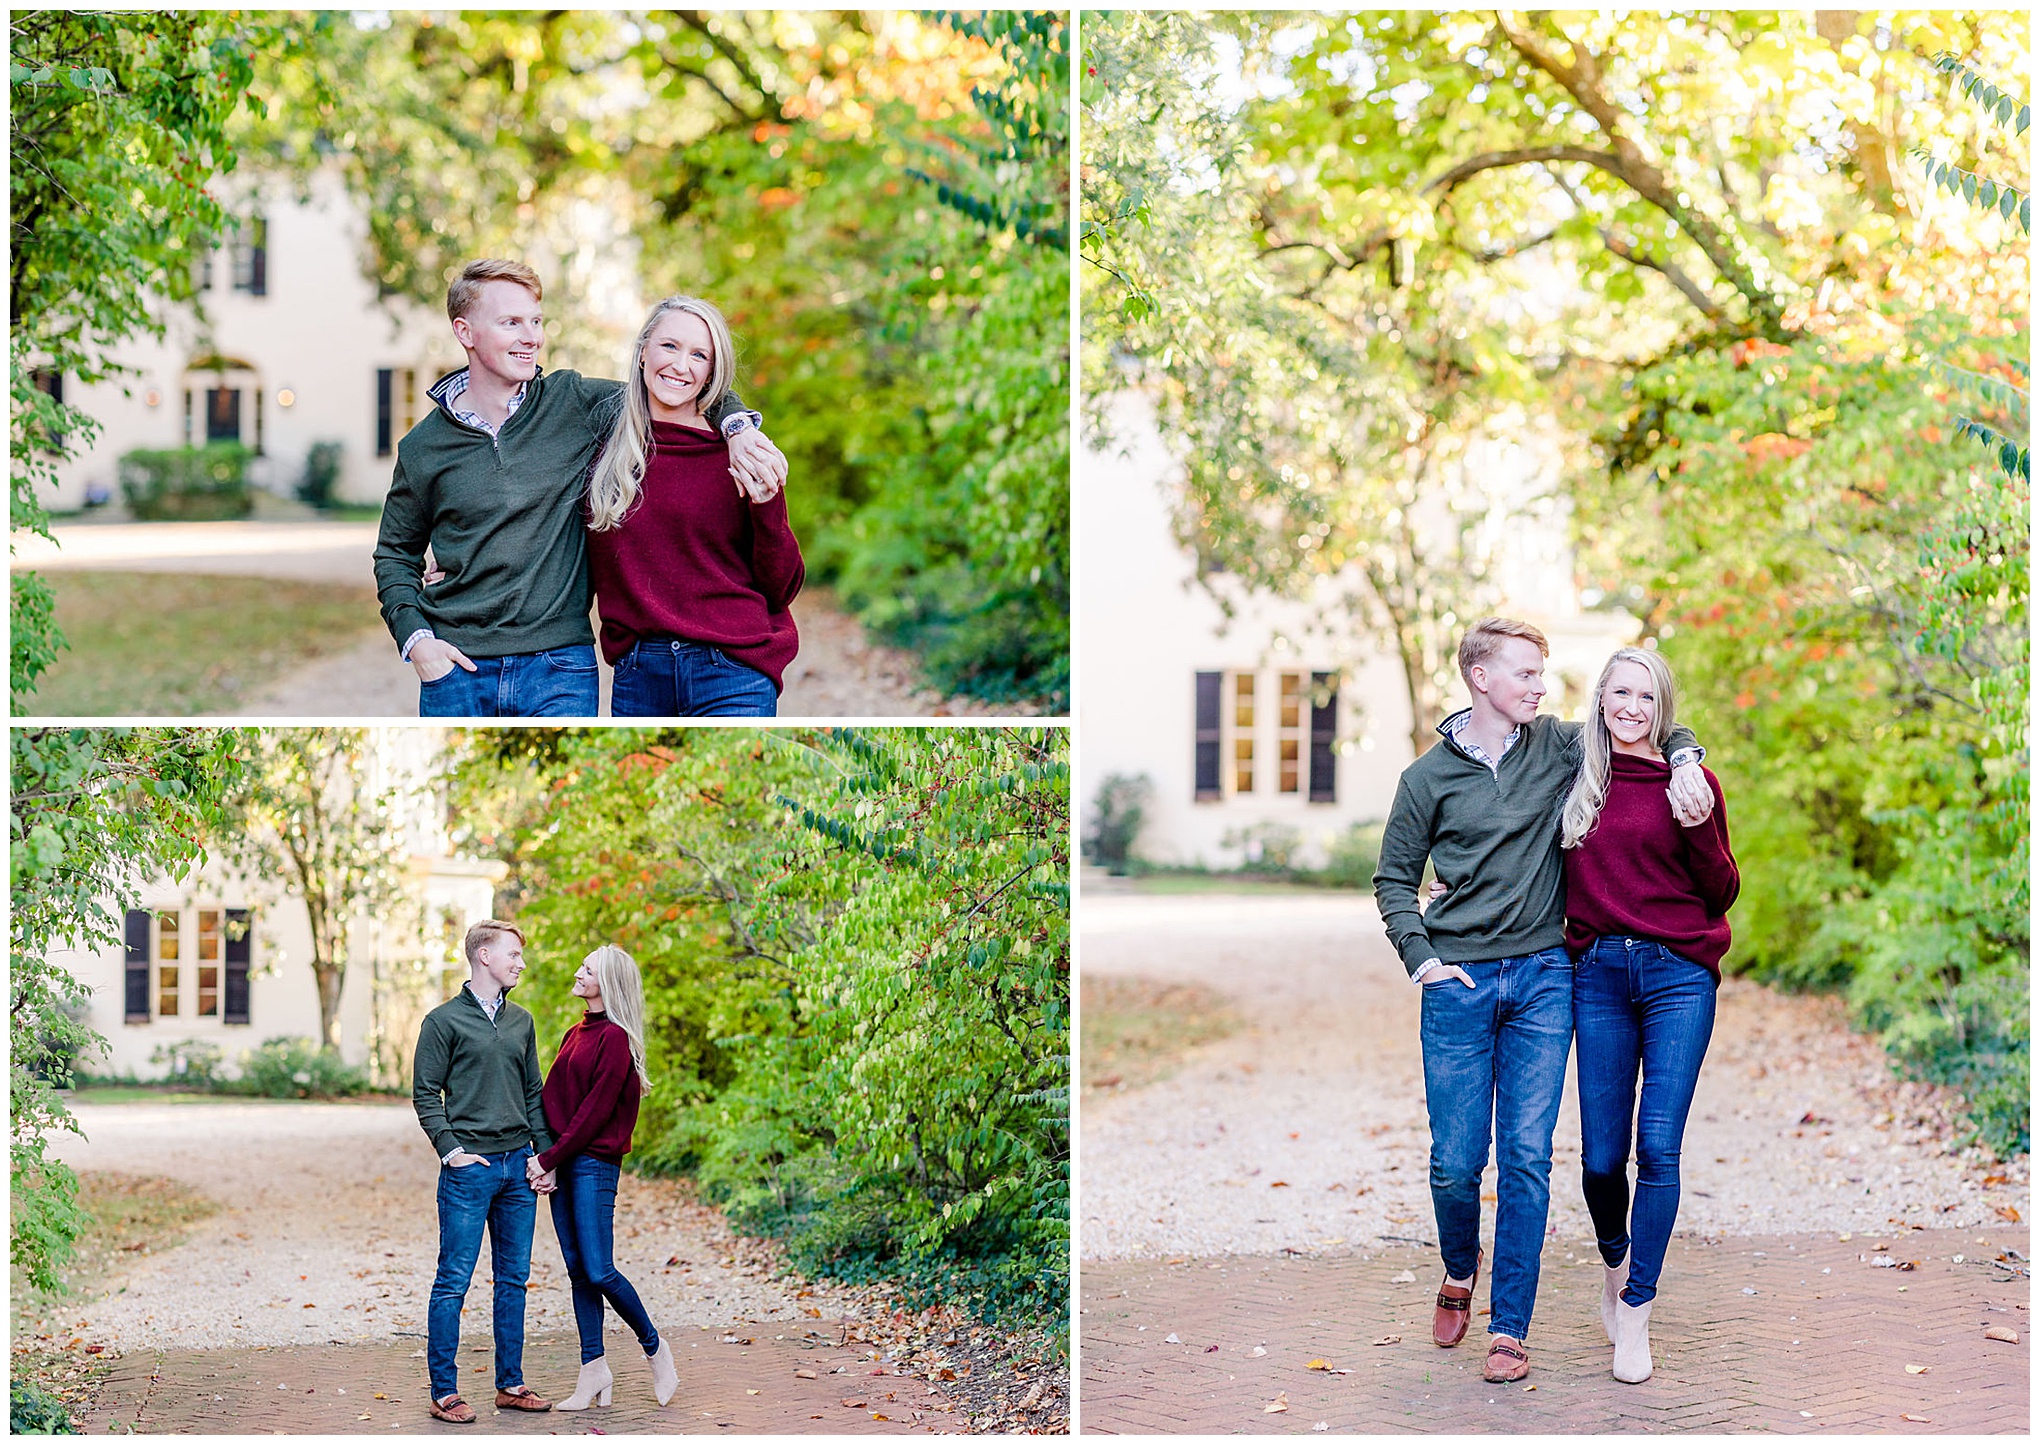 autumn magic hour engagement session, Washington D.C. engagement photos, Georgetown engagement photos, autumn engagement photos, DC portraits, DC engagement portraits, save the dates photos, Rachel E.H. Photography, couple with arms around each other, man with arm around woman